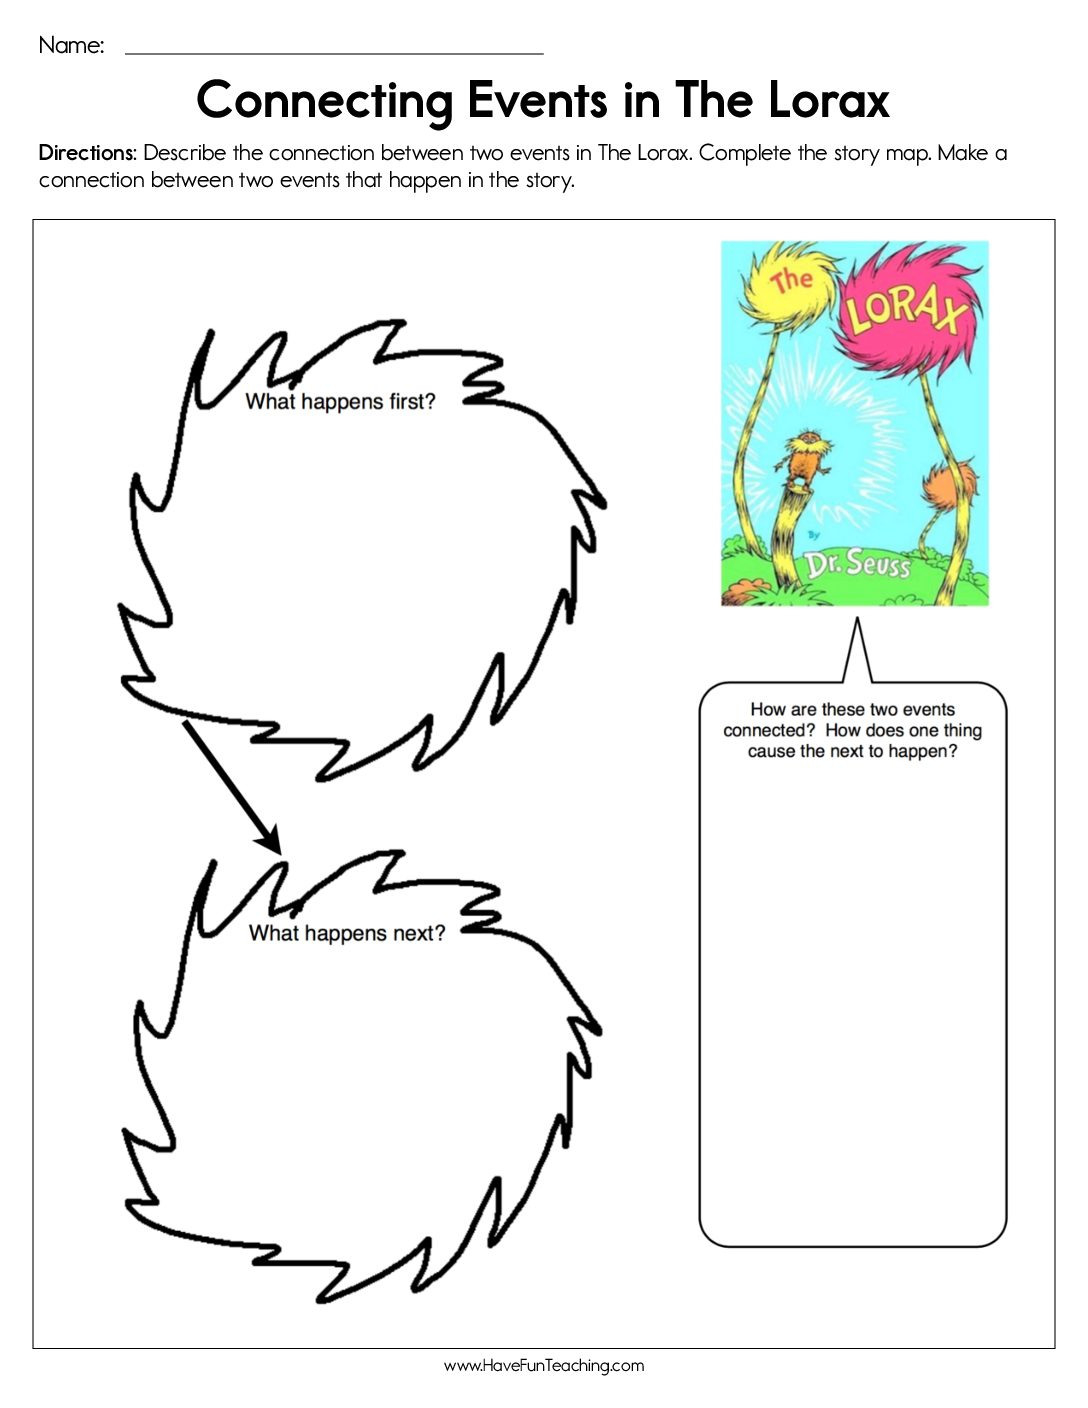 dr-seuss-worksheets-have-fun-teaching-db-excel